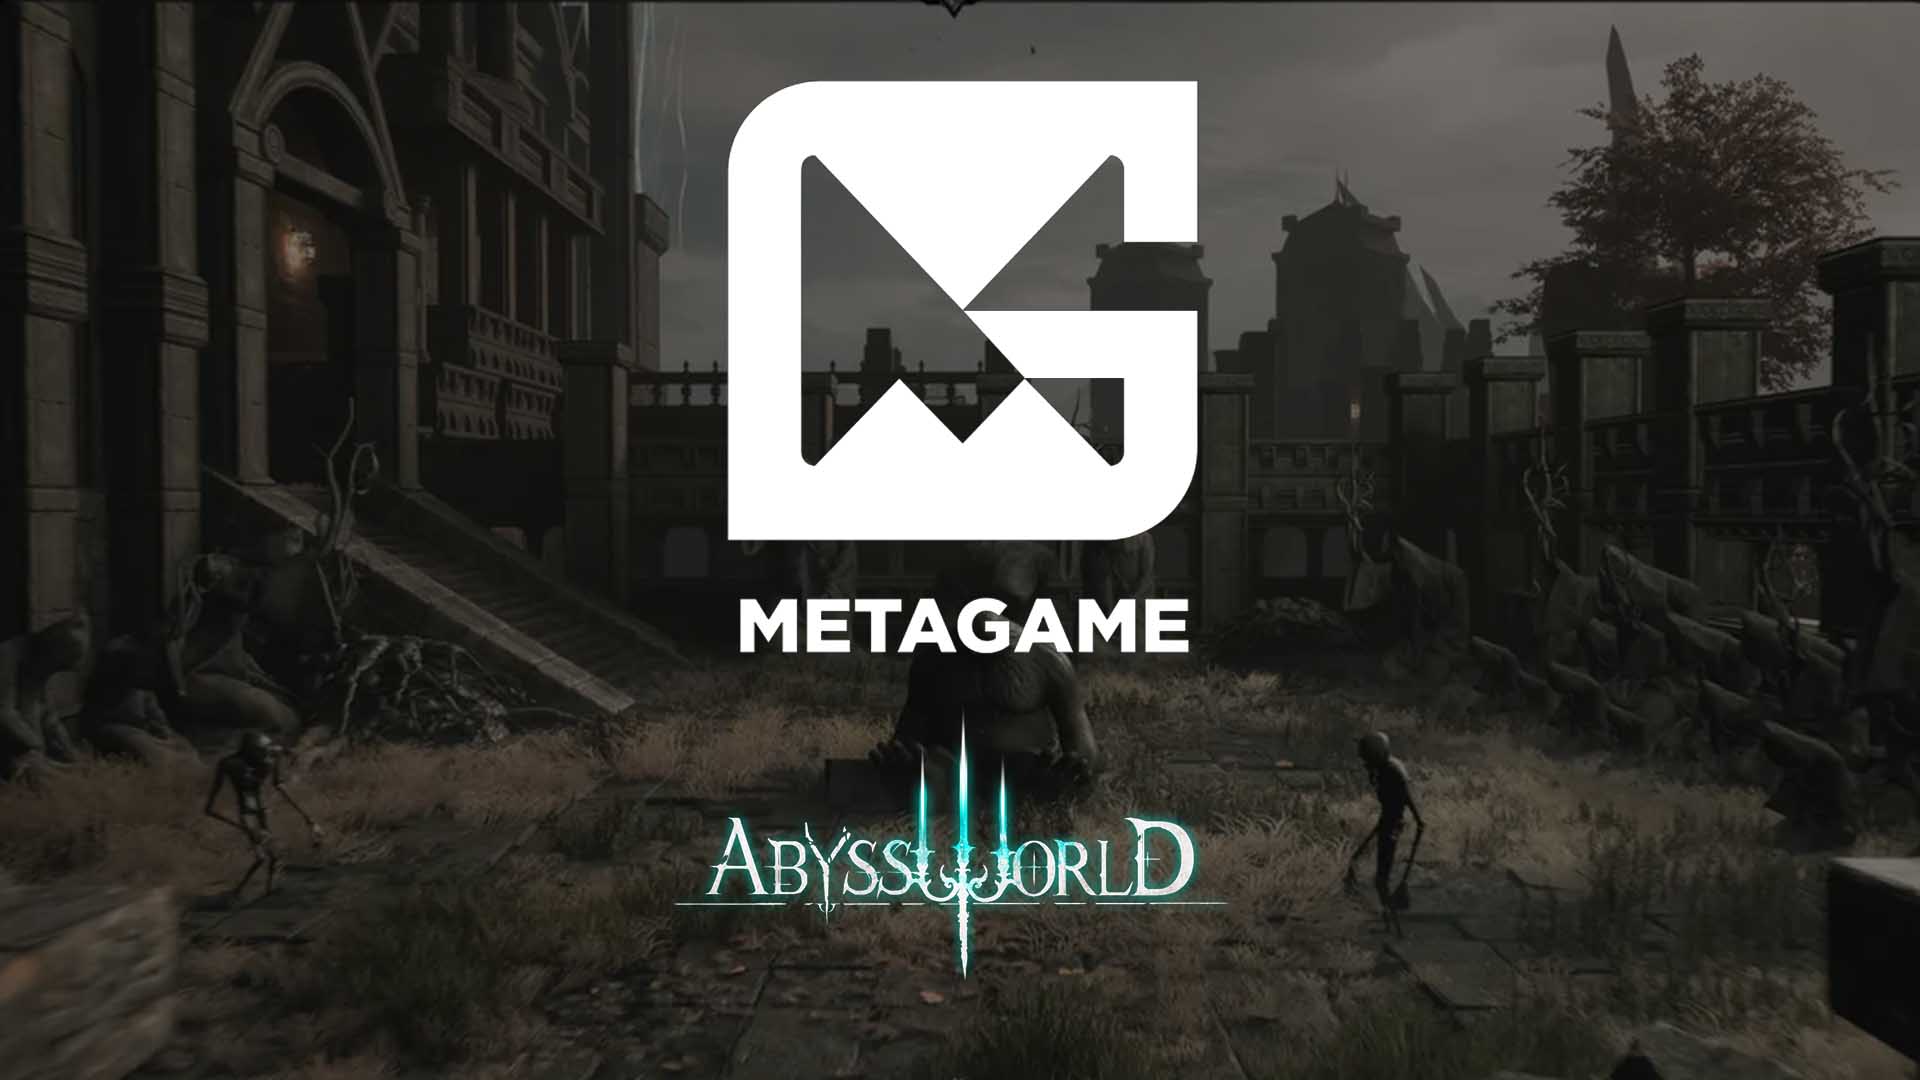 Metagame Industries Raises $100M For Abyss World